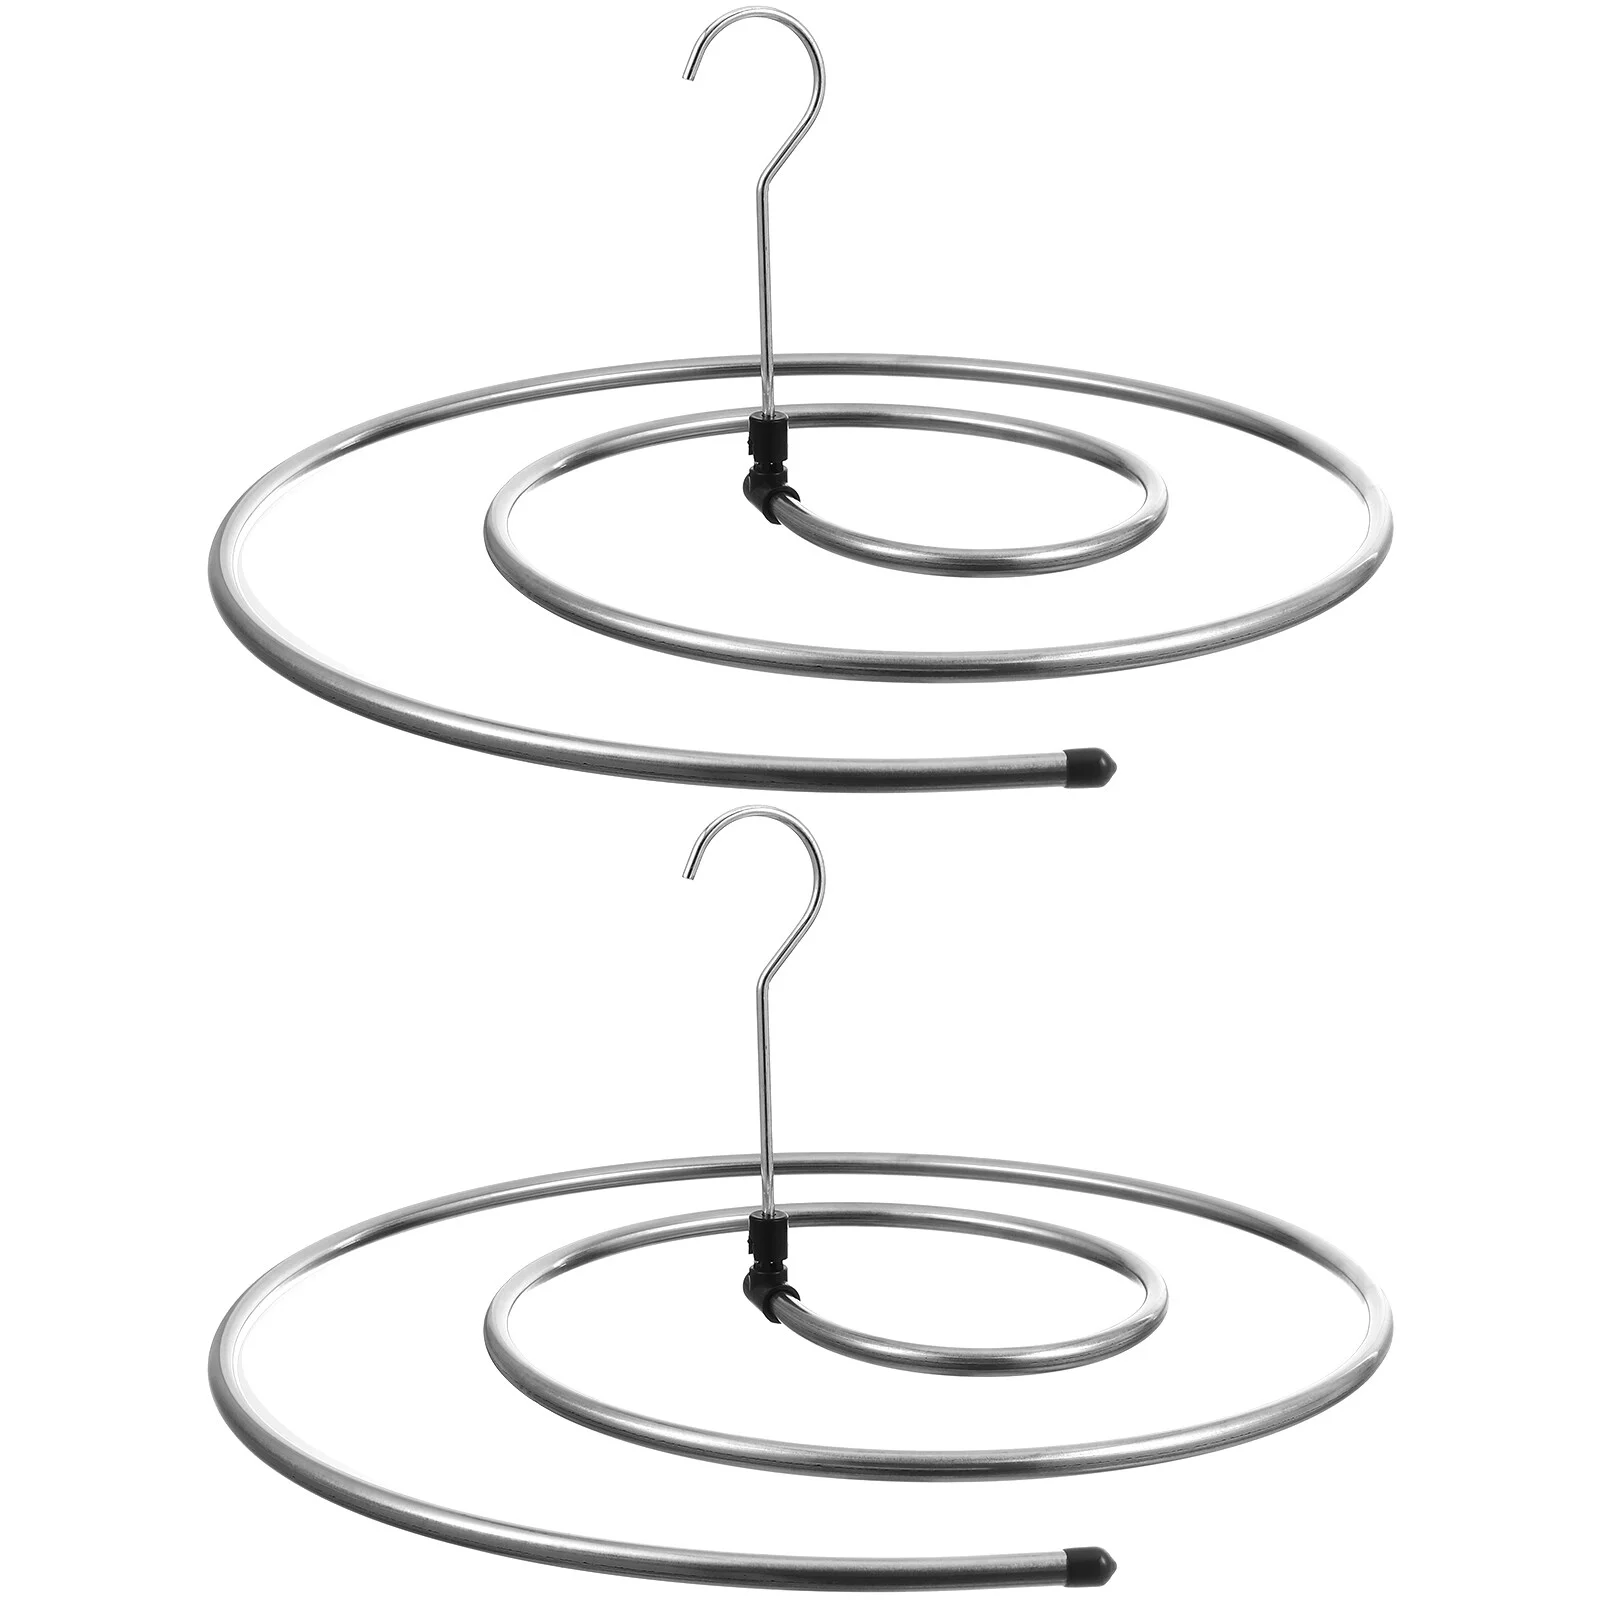 

2Pcs Spiral Shaped Drying Rack Mental Laundry Stand Hanger for Bed Sheet Bedspread Scarf Blanket Bath Towel Towelling ( Silver )